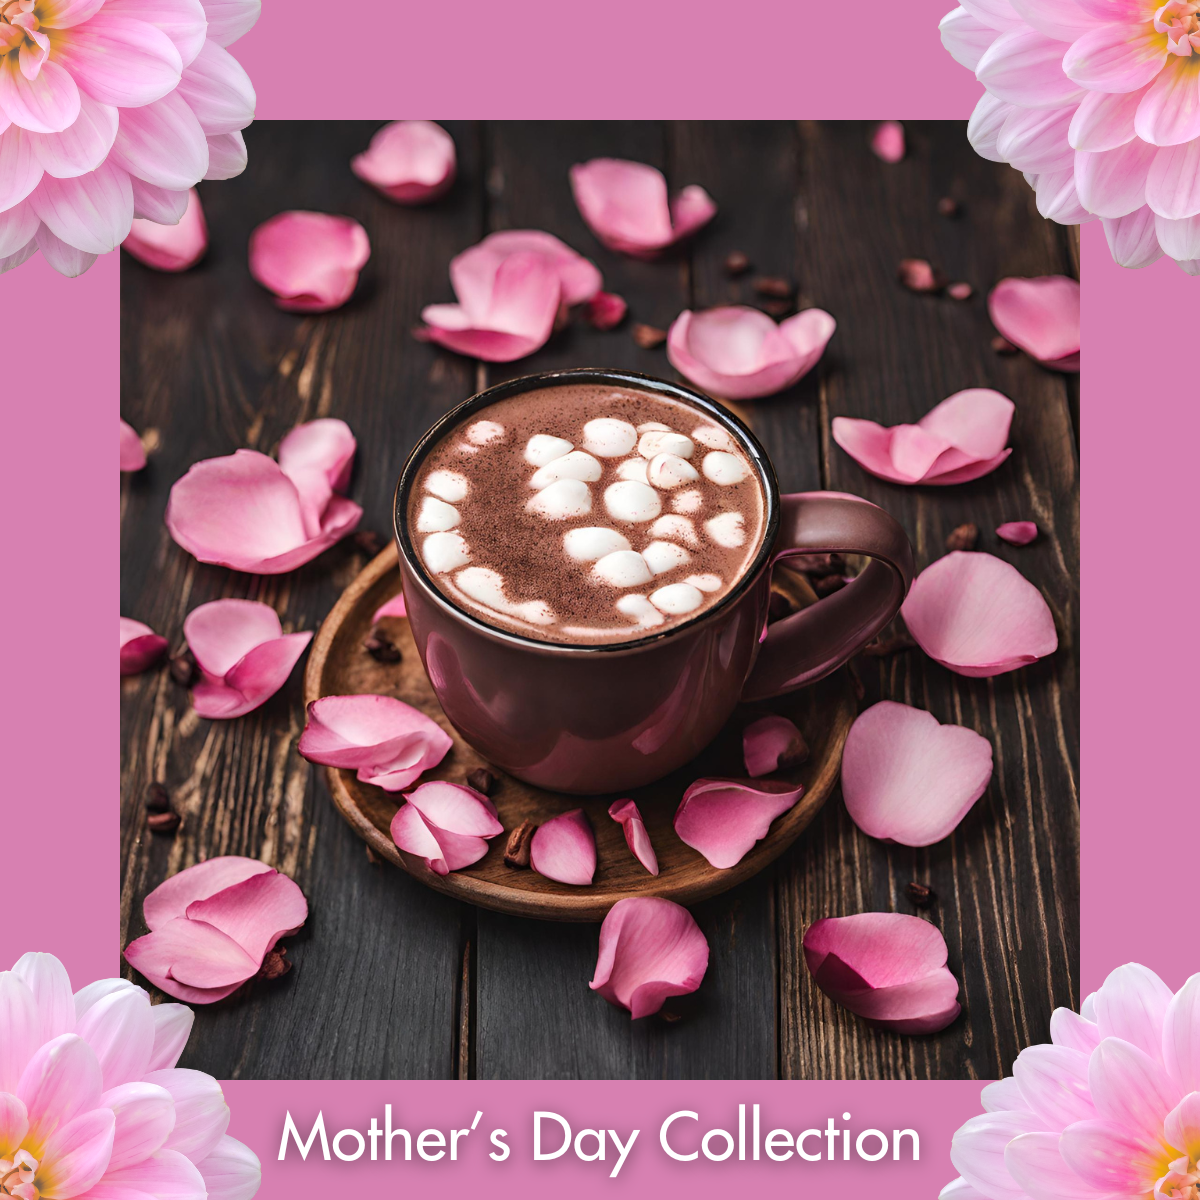 For My Mum - Mother's Day Collection